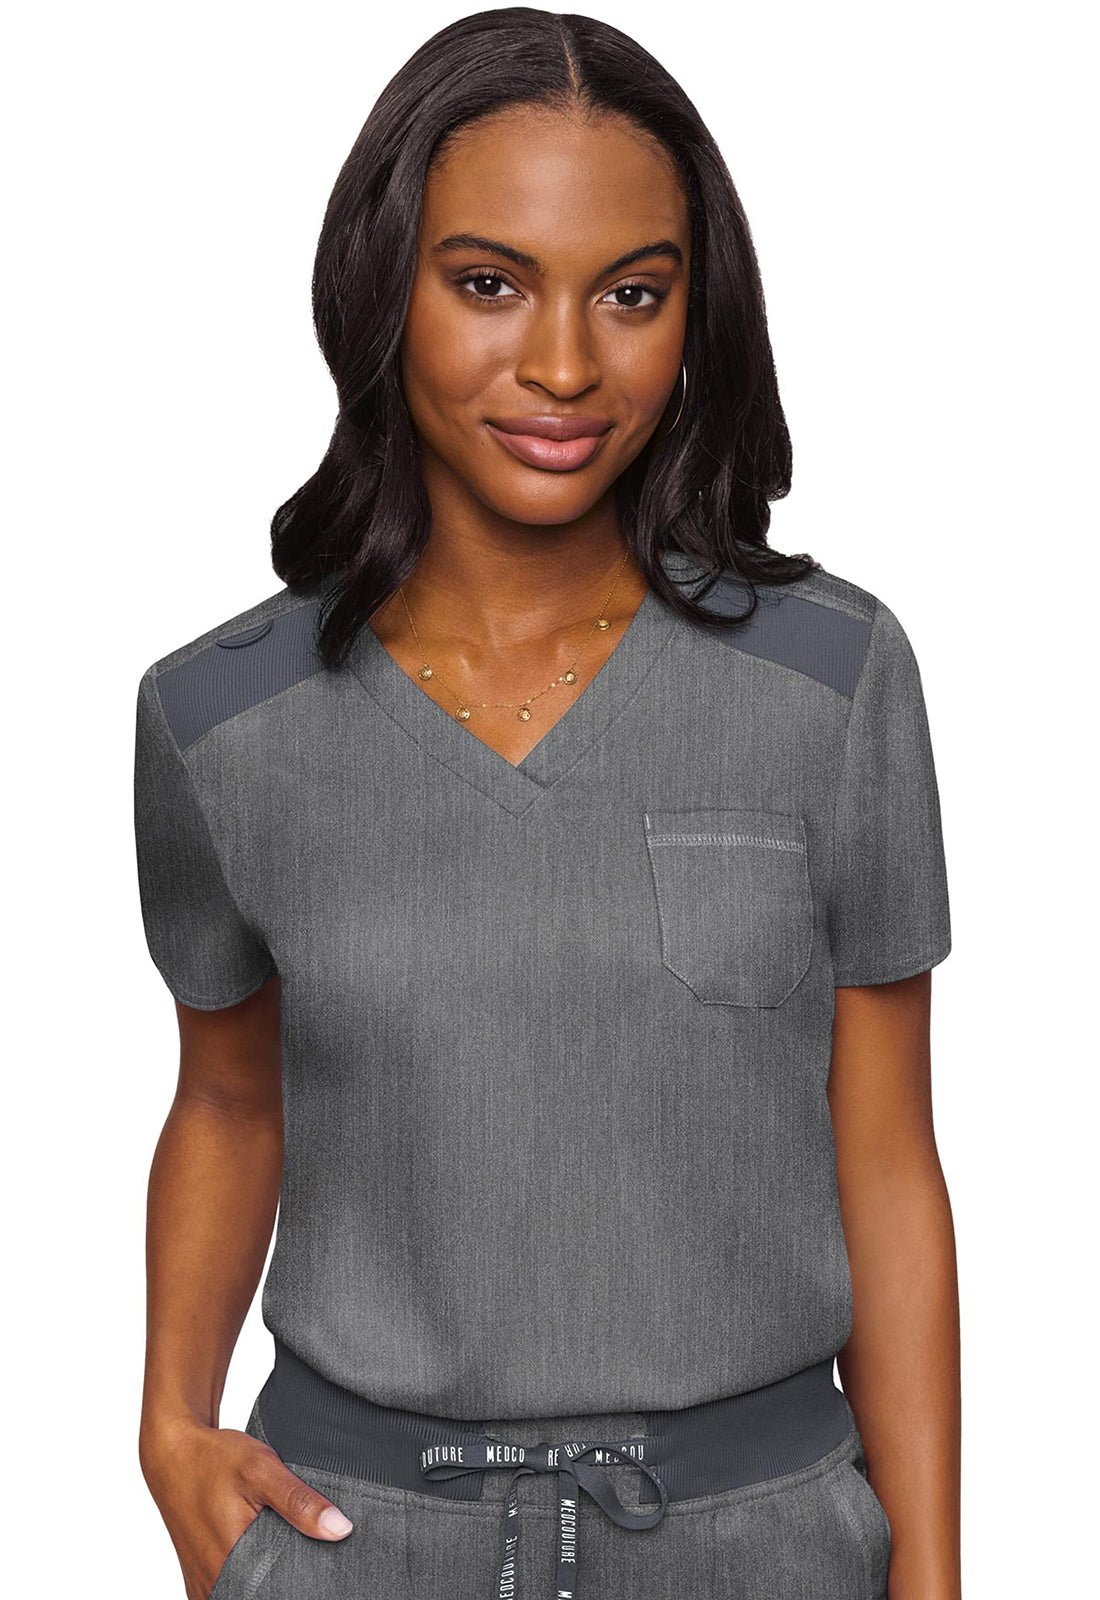 Med Couture Touch V Neck Scrub Top MC7448 in Eggplant, Pink, Lilac, Olive, Sea Mist, Slate, Teal - Scrubs Select